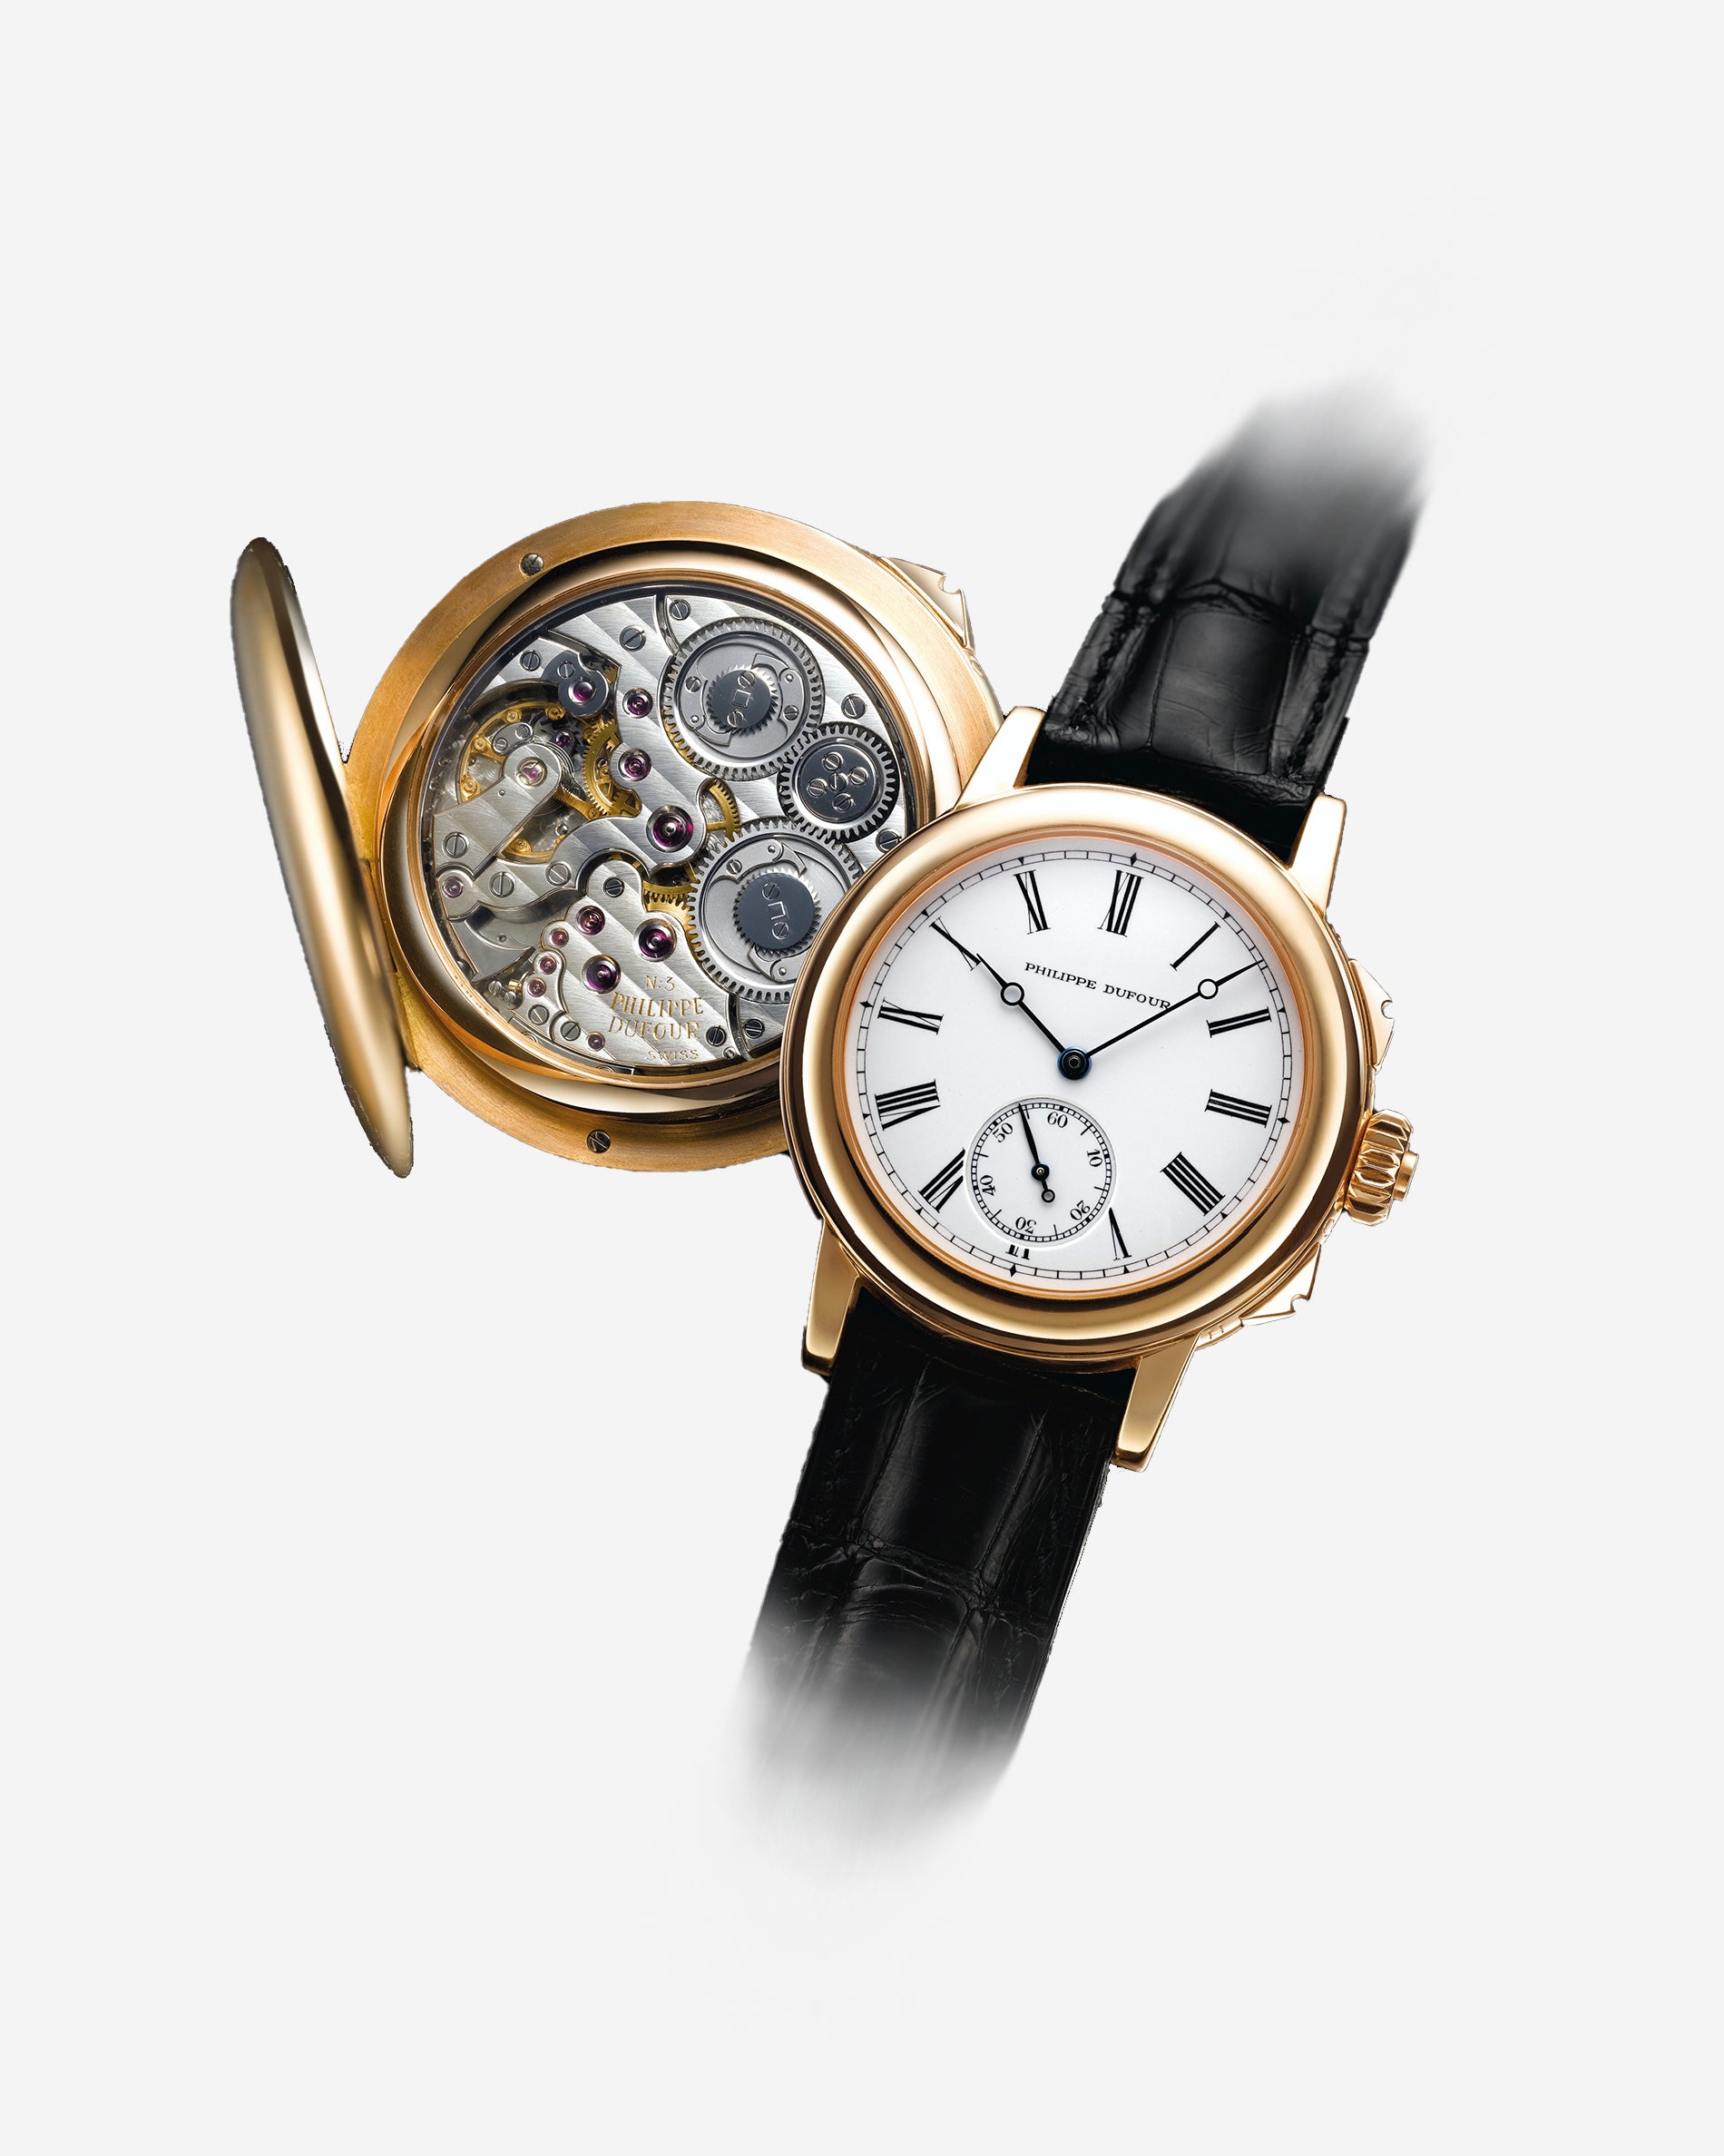 Philippe Dufour Grand Sonnerie minute-repeater wristwatch in yellow gold from A Collected Man London